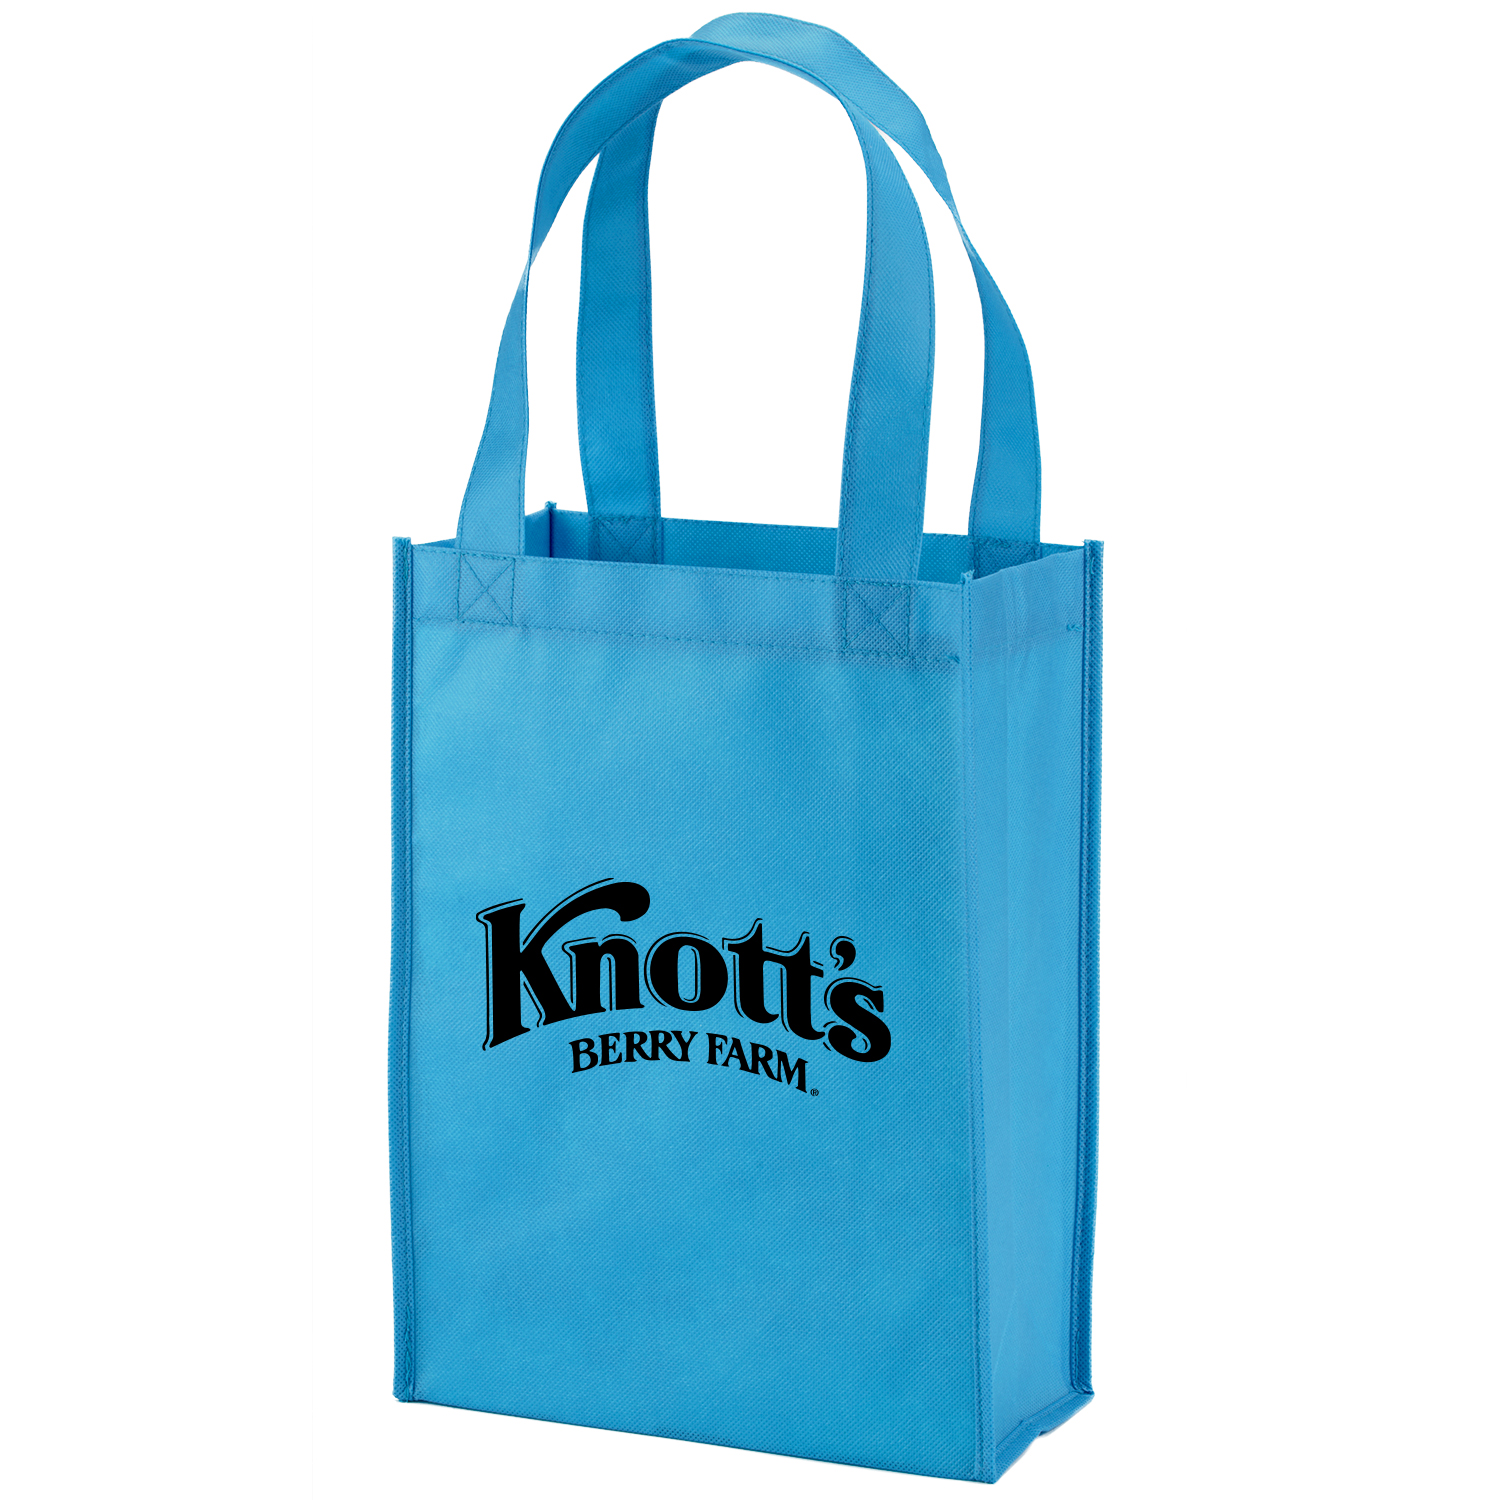 :: Evans Manufacturing - Promotional Products Supplier, Plastic ...